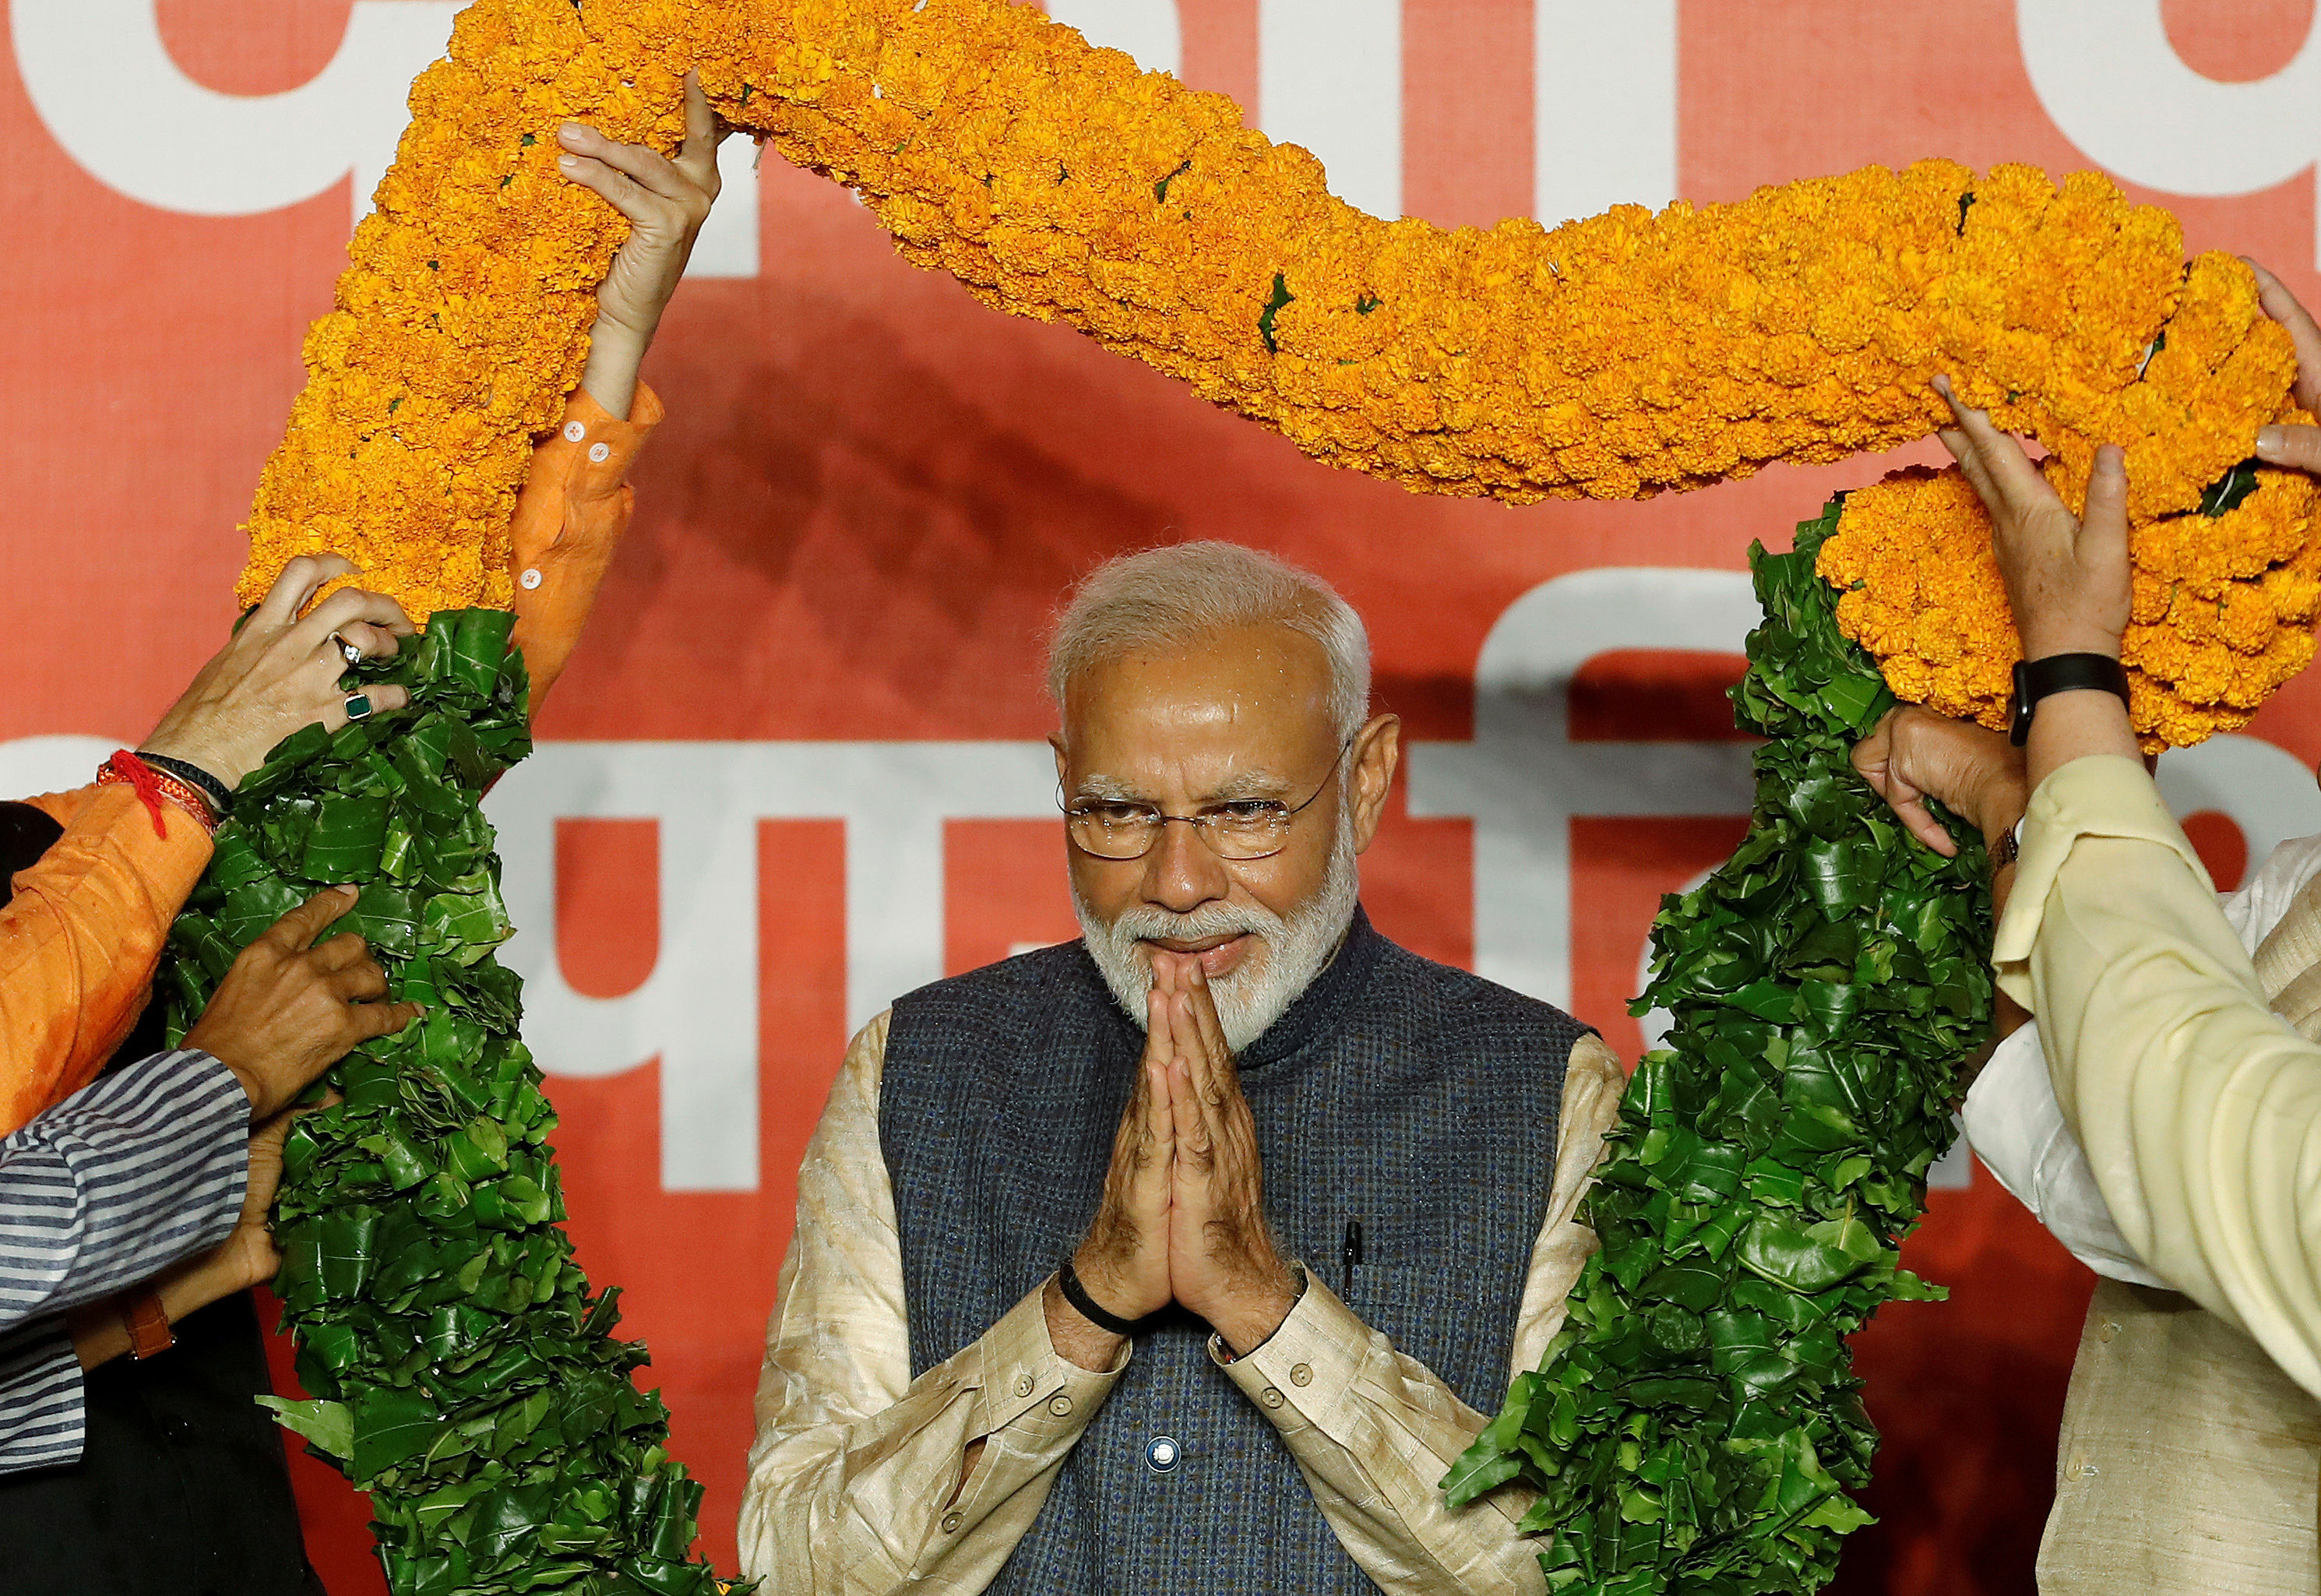 FILE PHOTO: Indian Prime Minister Narendra Modi gestures as he is presented with a garland by Bharatiya Janata Party (BJP) leaders after the election results in New Delhi